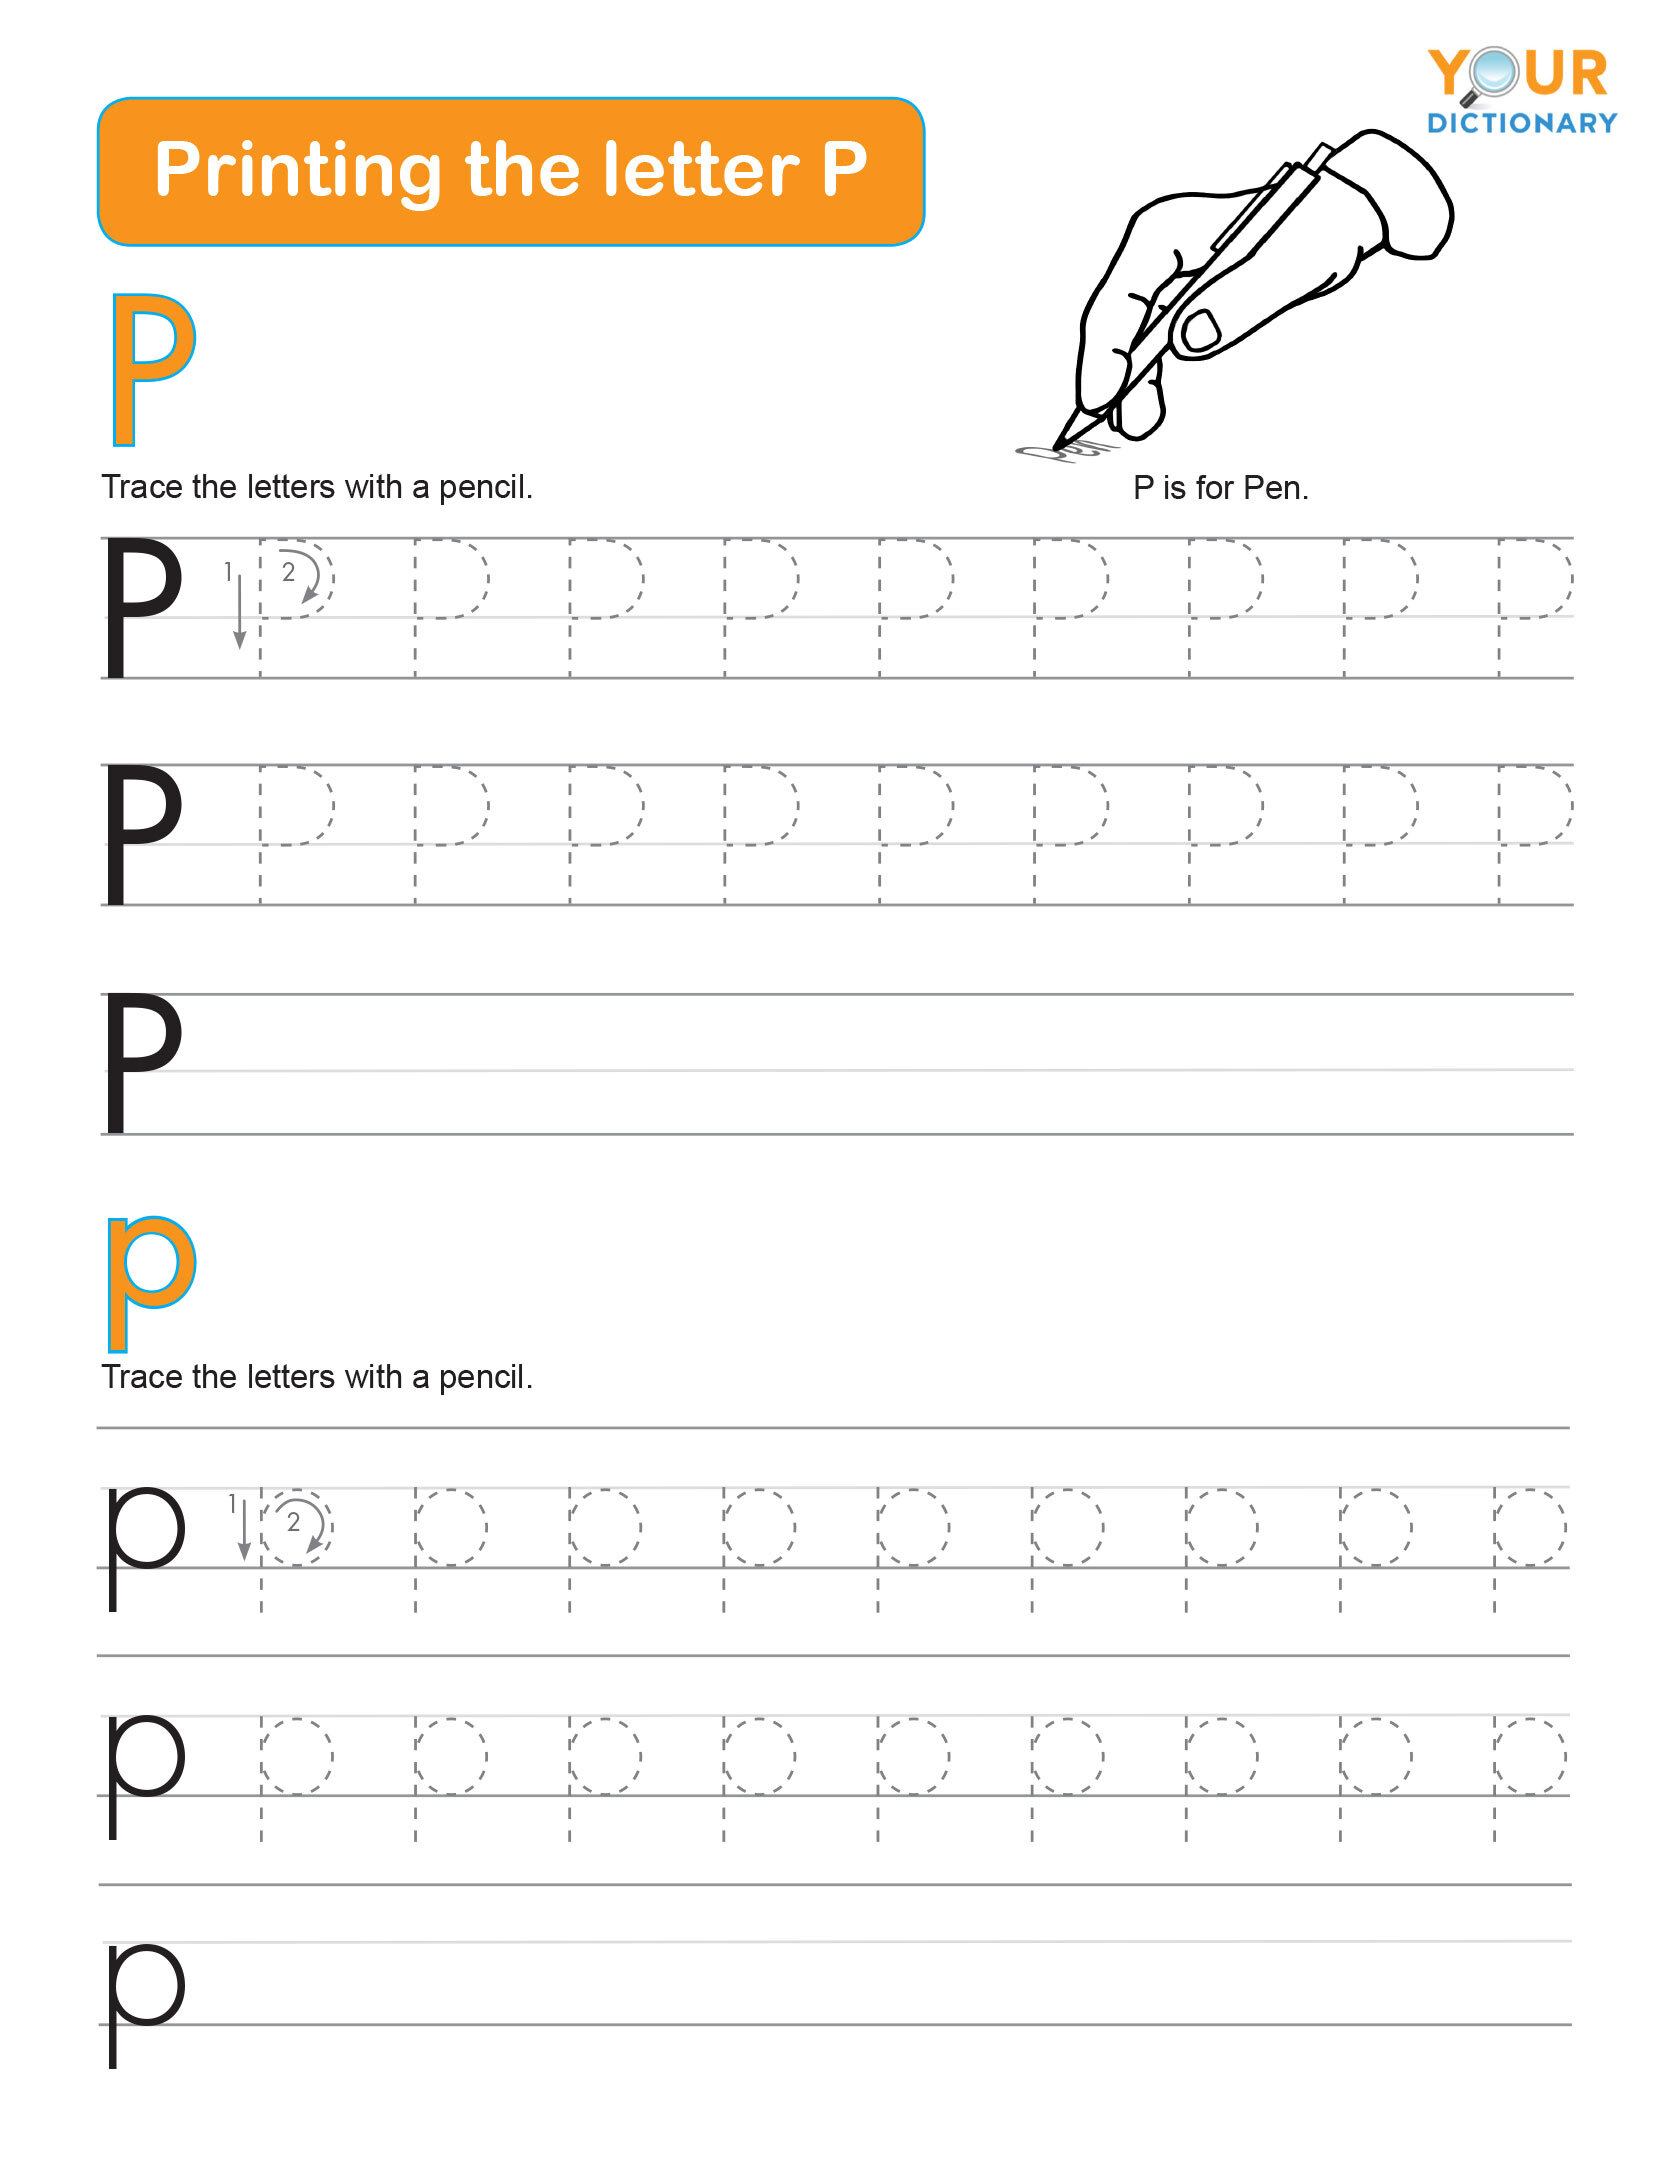 tracing the letter p